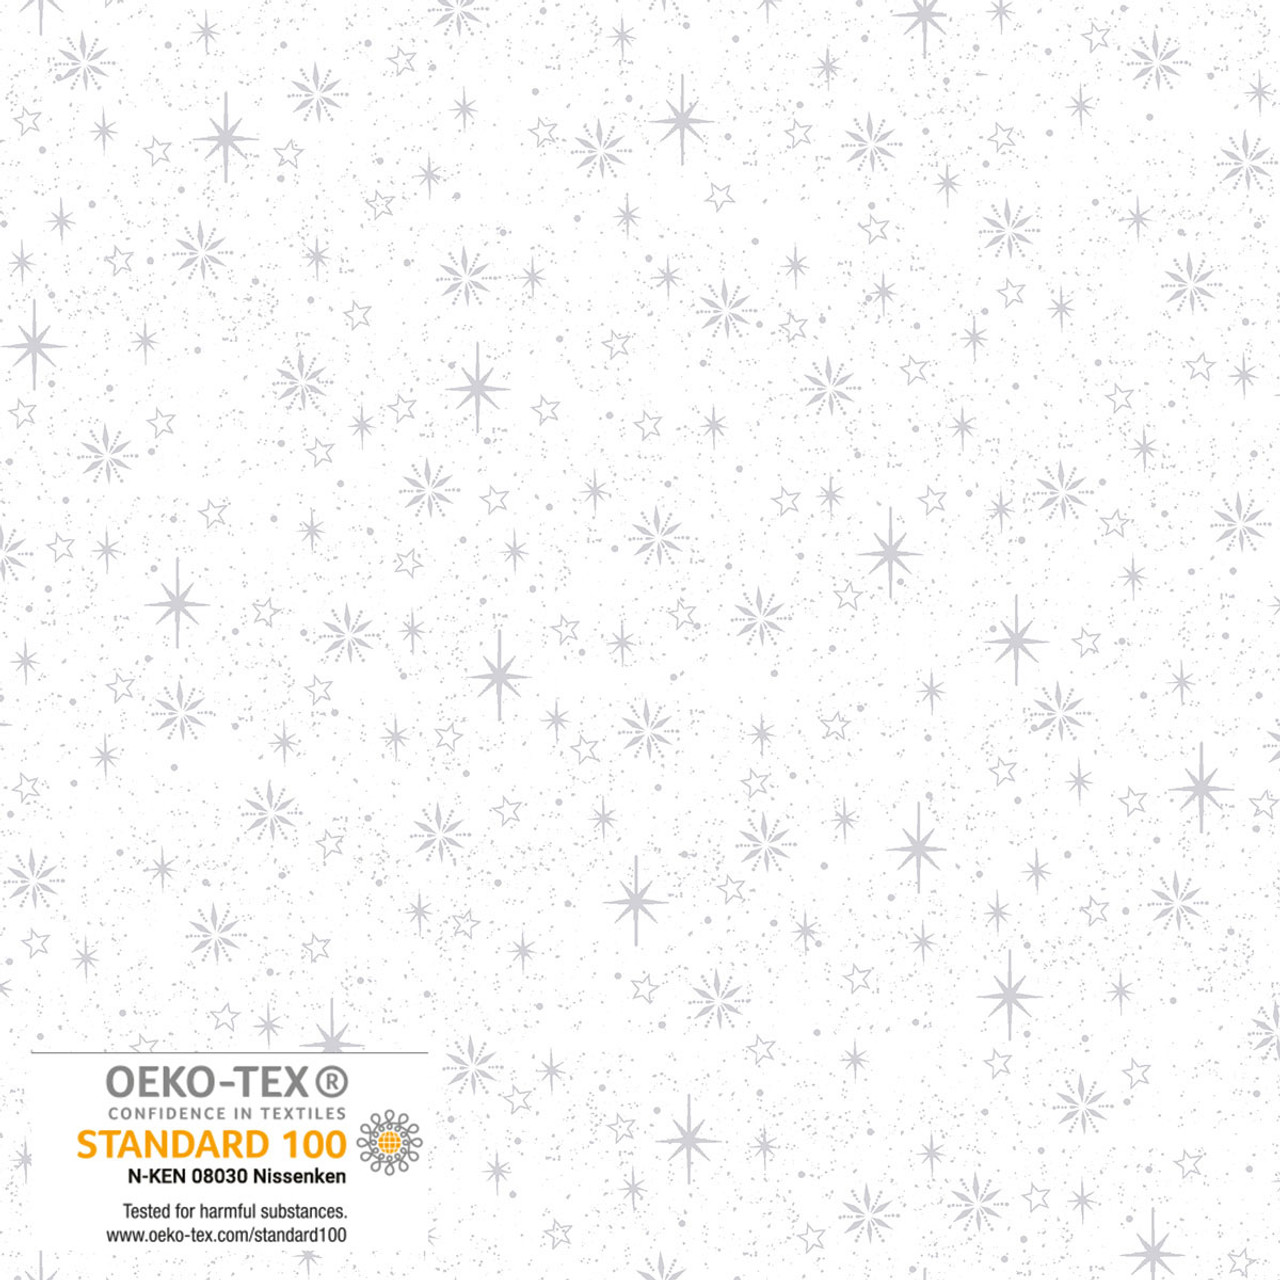 Stof of Denmark | Sold by Blank Quilting |We Love Christmas